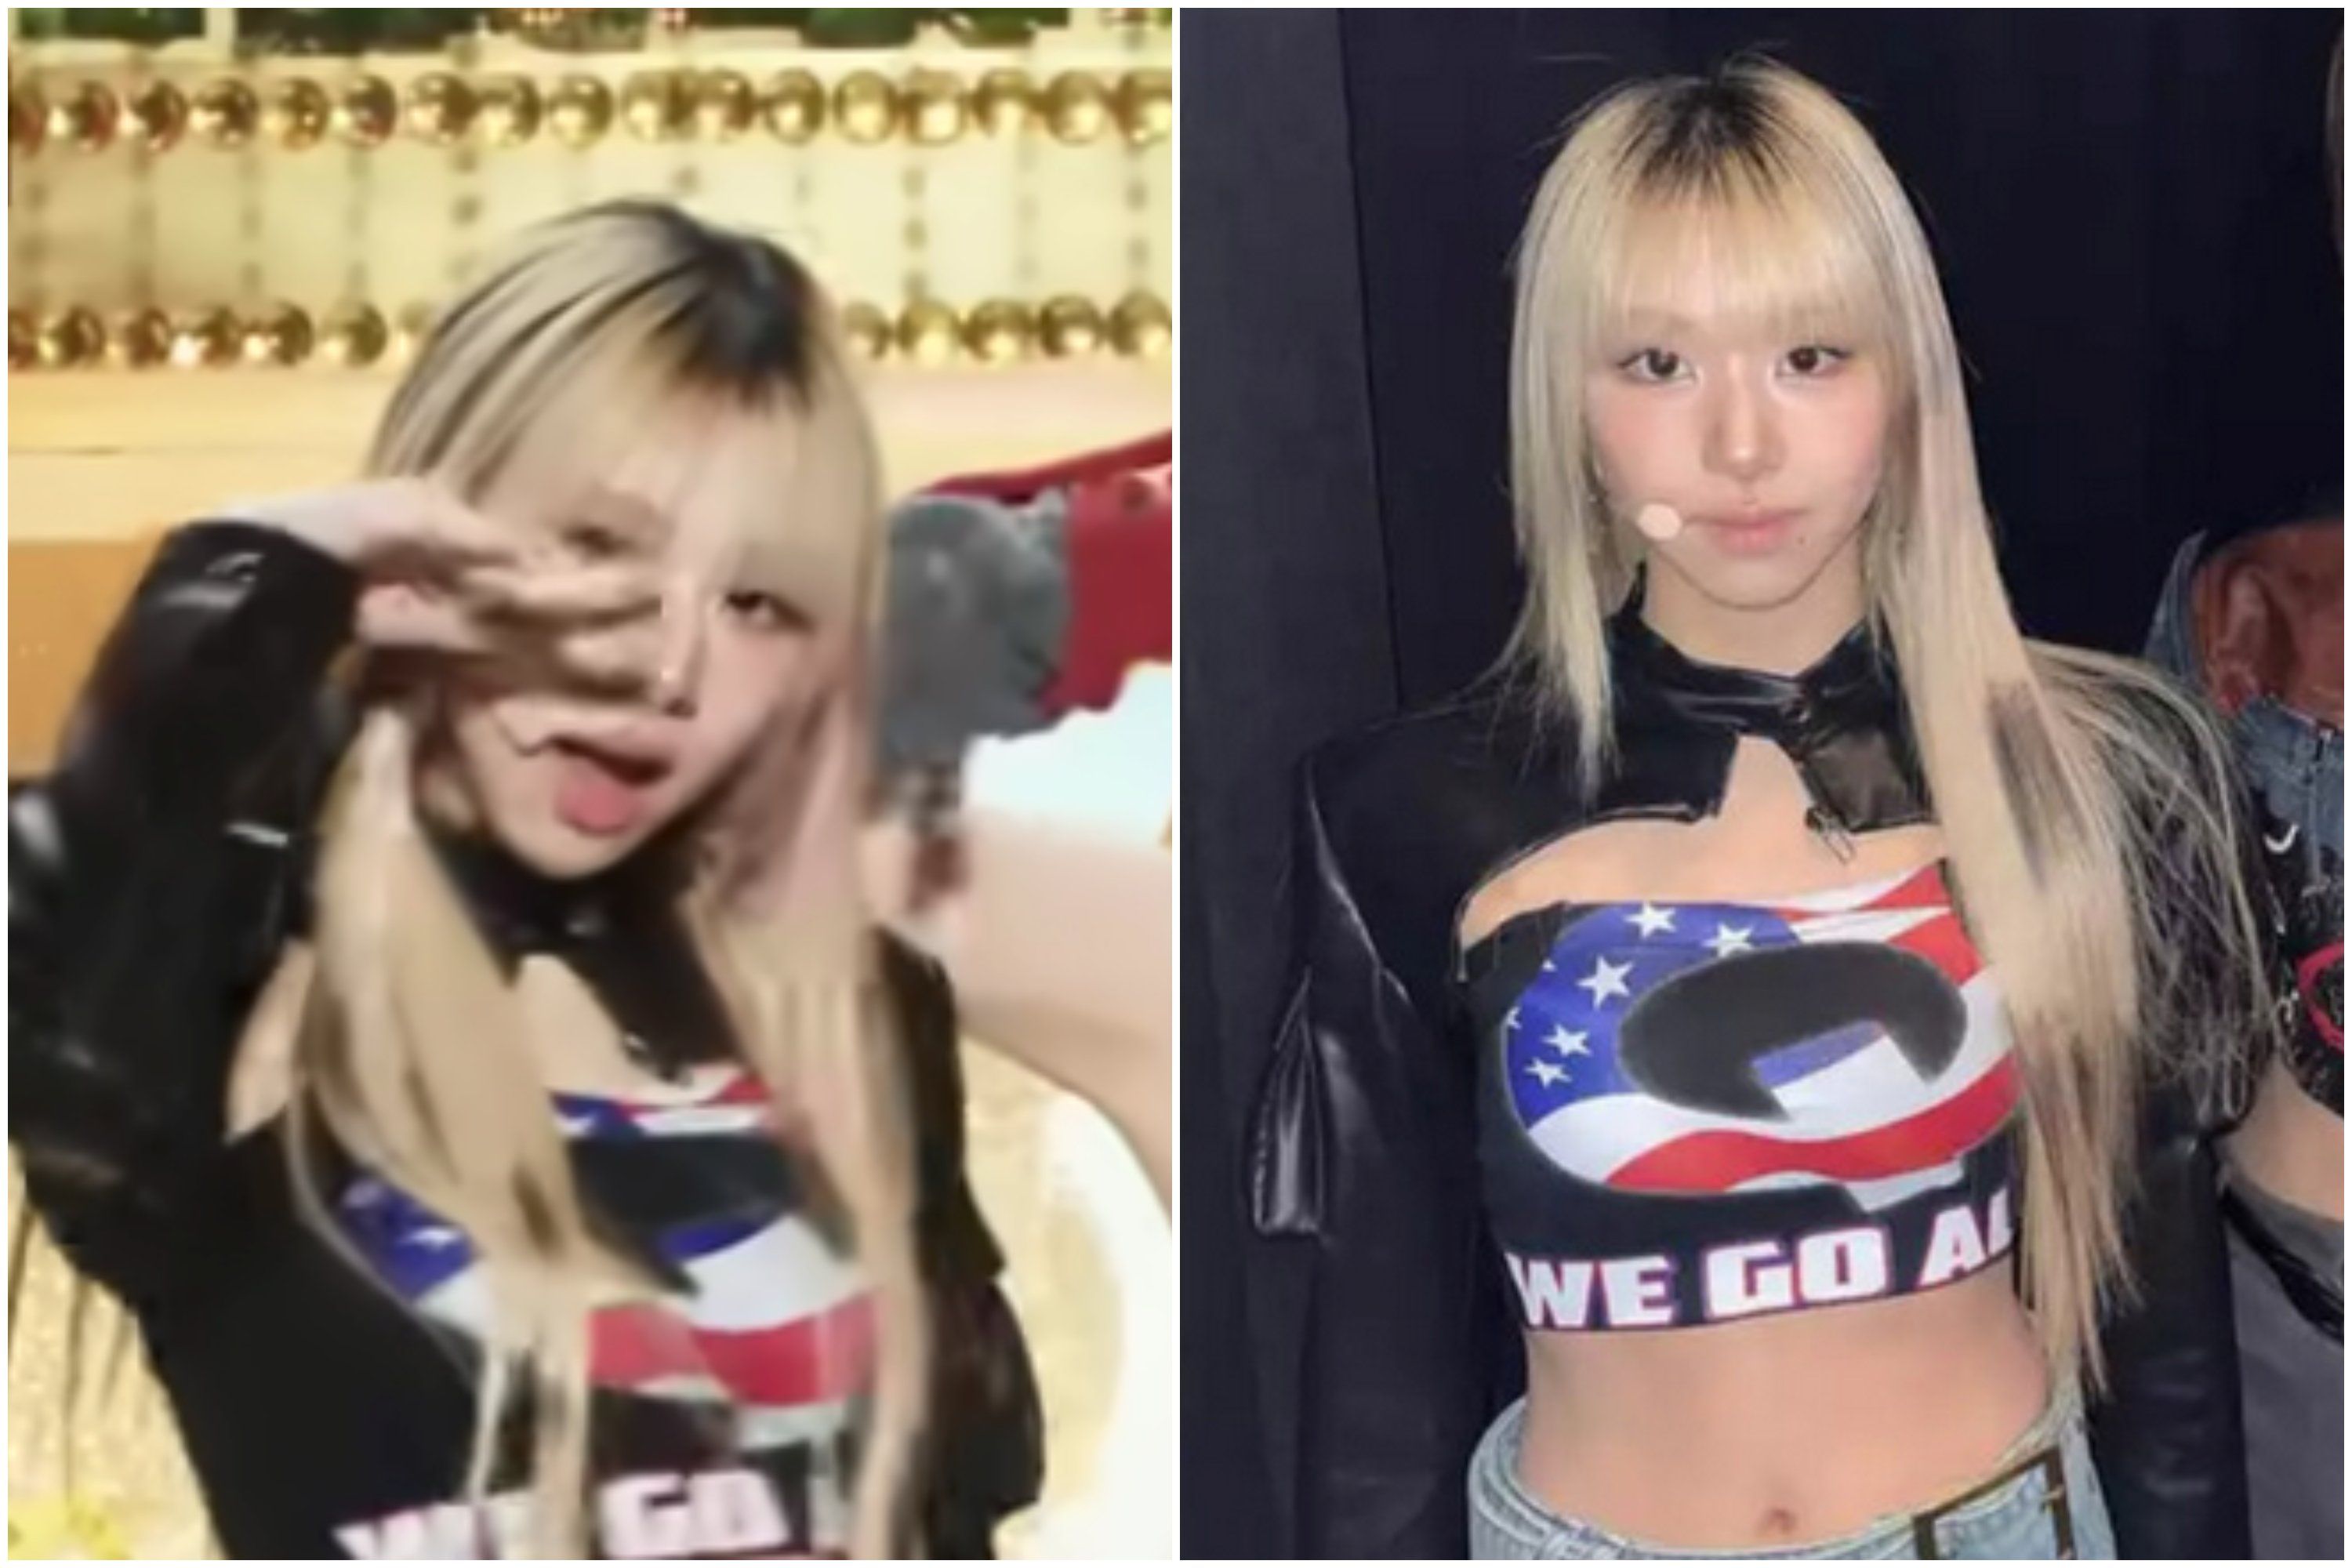 Rodeo monarki Beskæftiget K-pop star Chaeyoung wears QAnon t-shirt during live performance | indy100